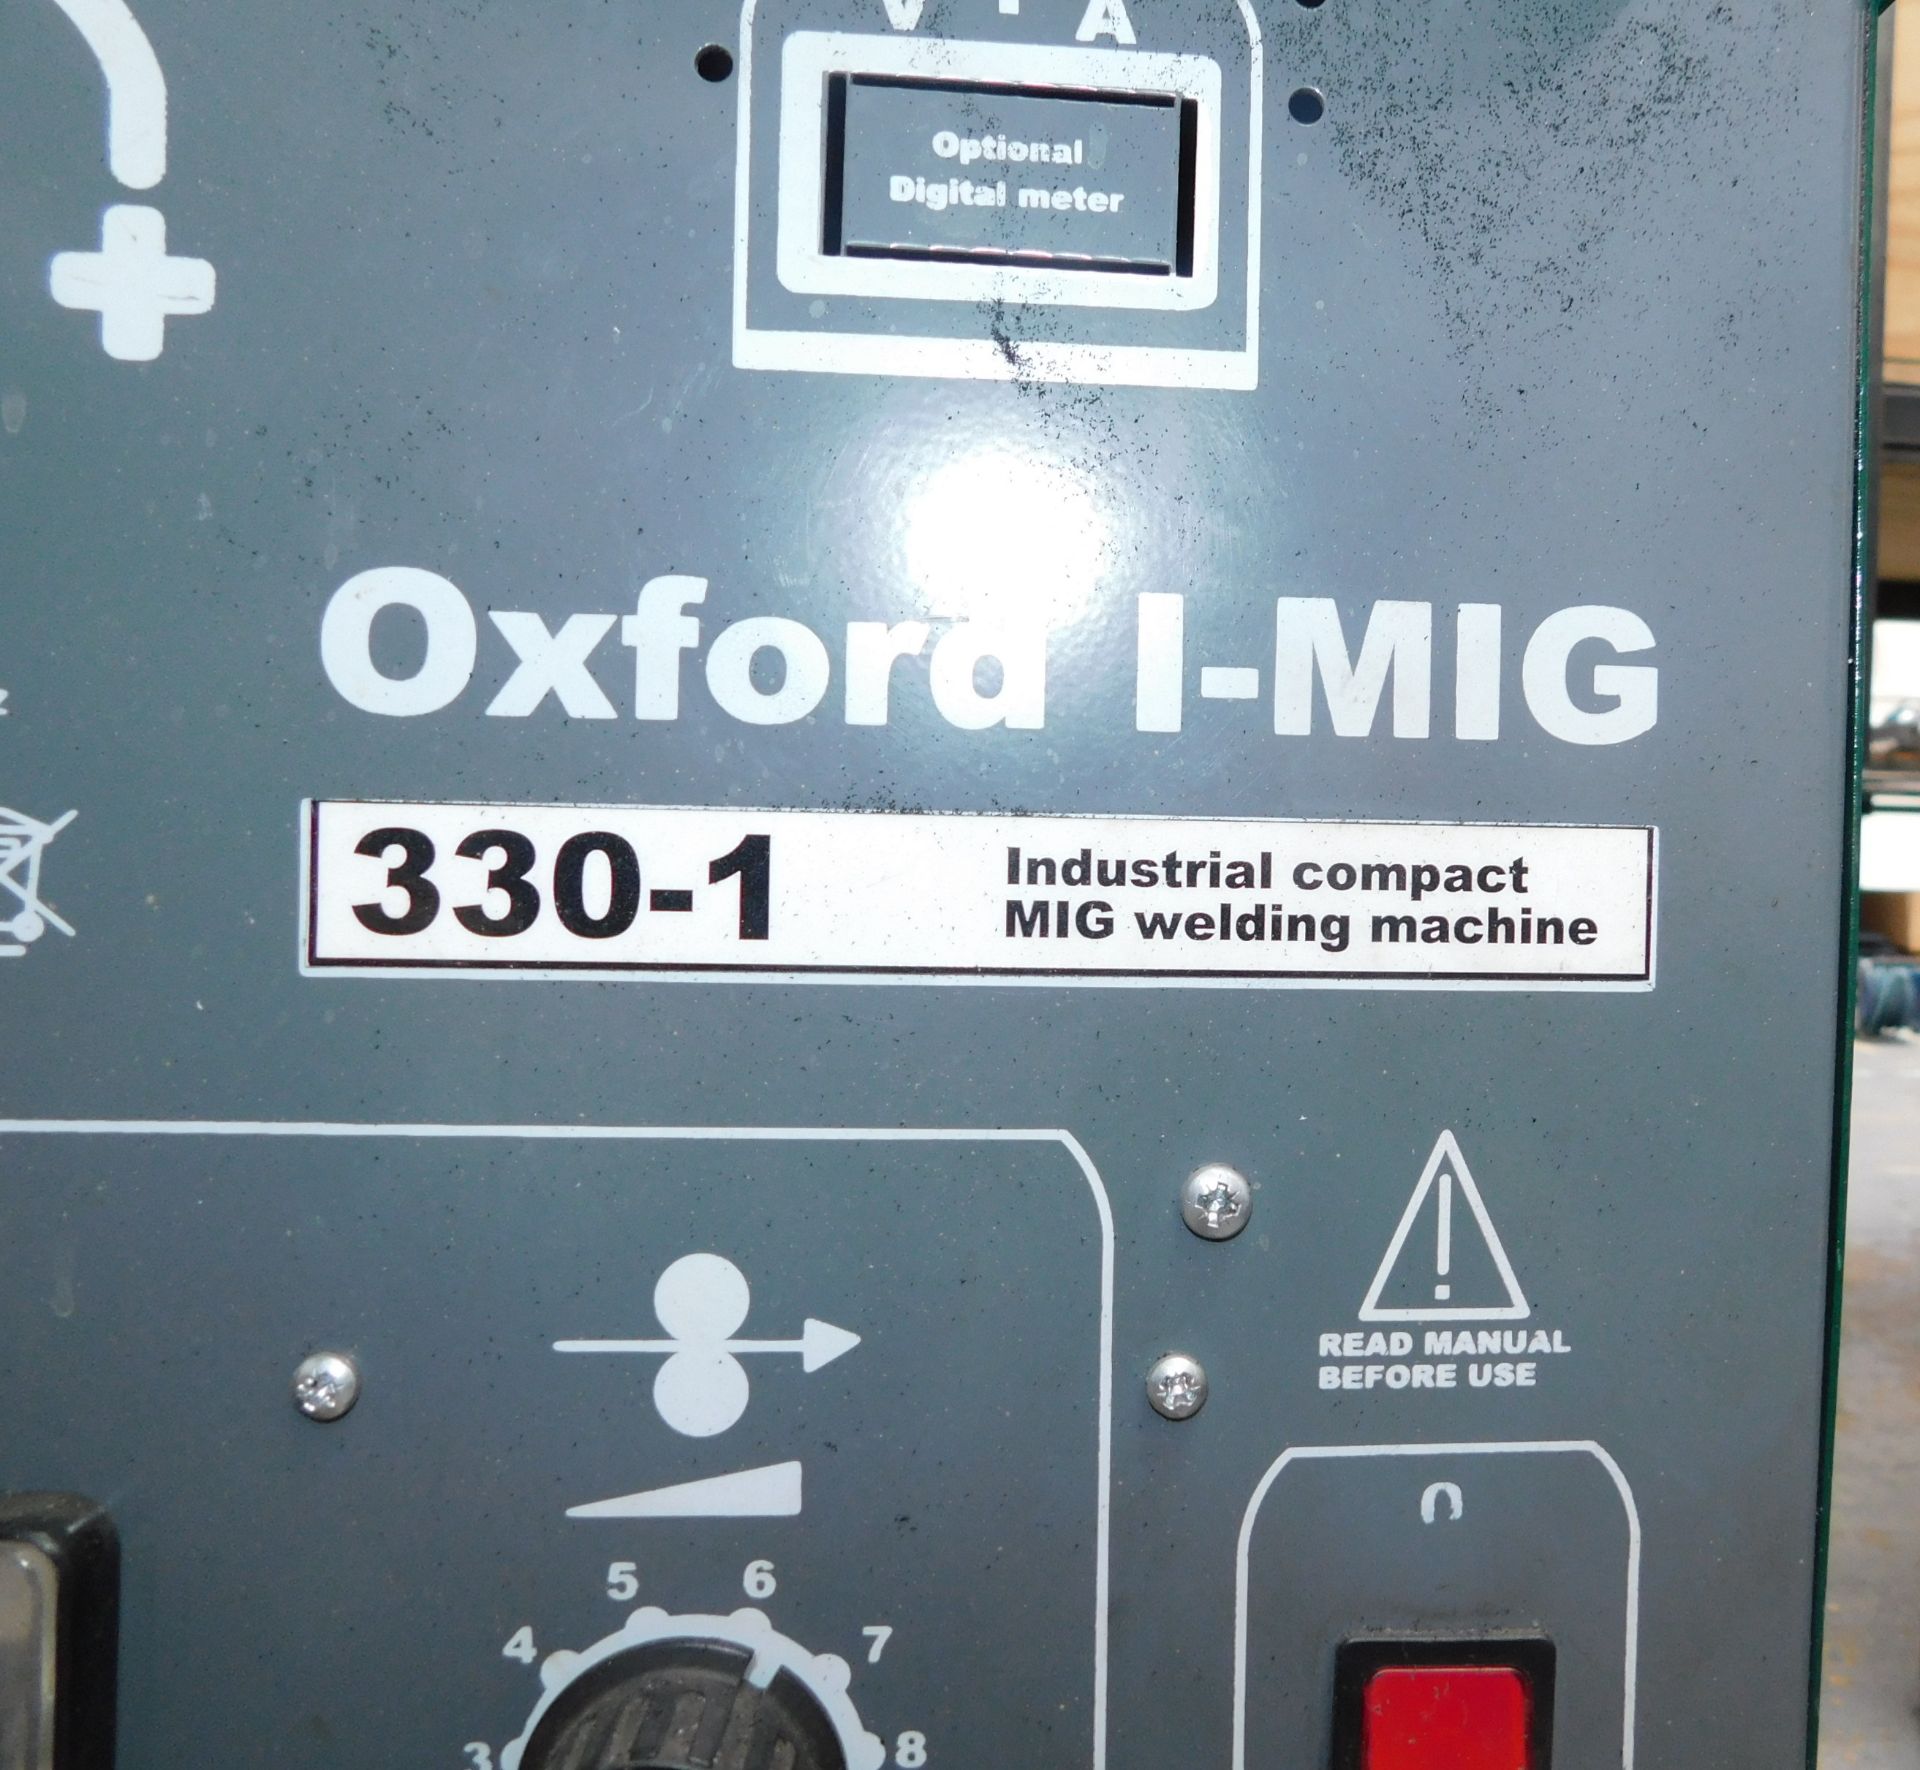 Oxford I-Mig 330-1 Industrial Compact Mig Welder (Location: Kettering - See General Notes for More - Image 2 of 3